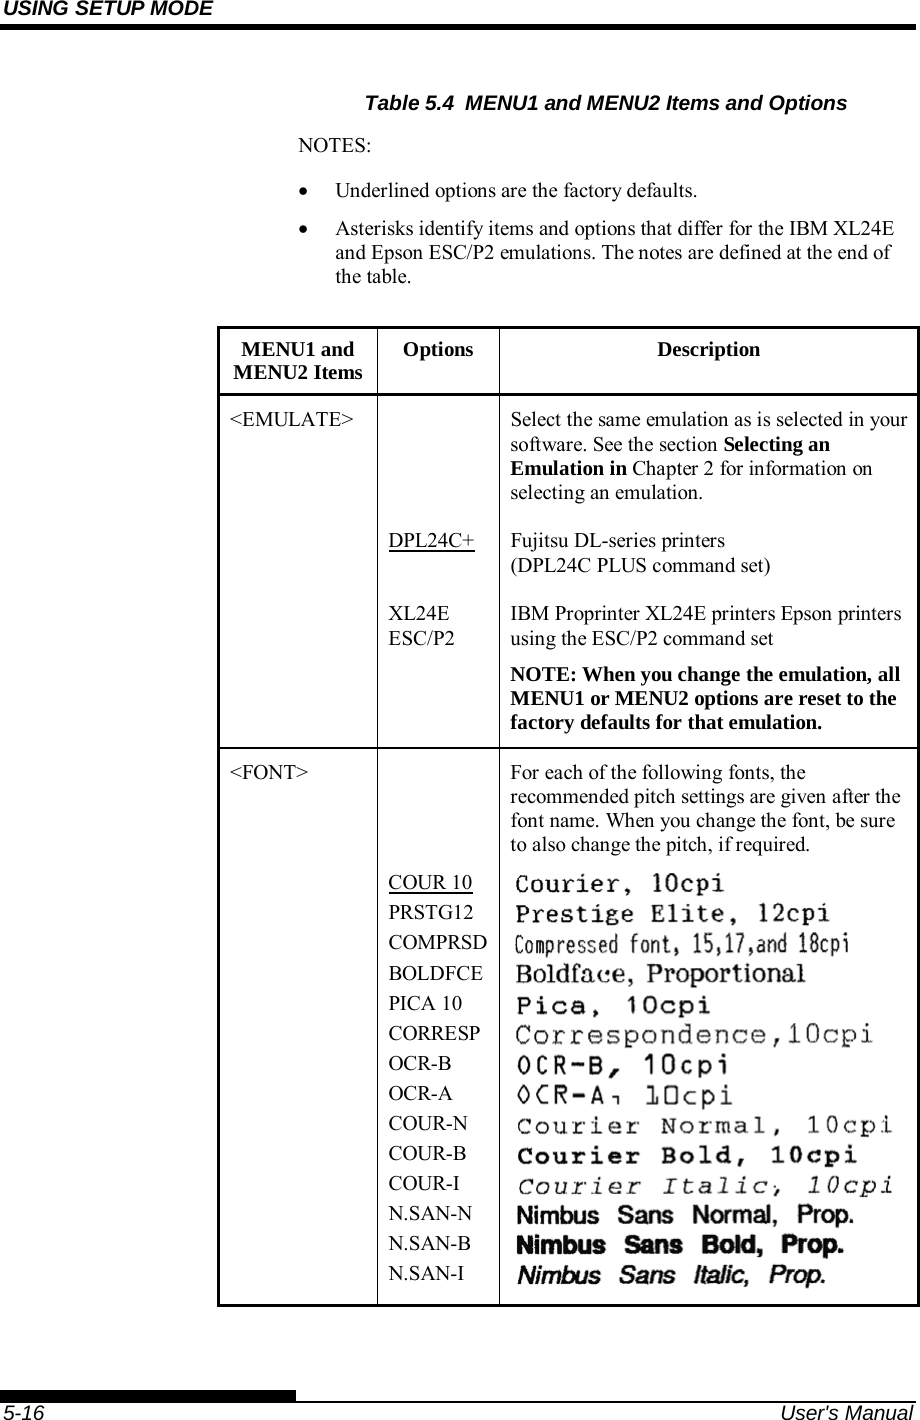 USING SETUP MODE    5-16  User&apos;s Manual Table 5.4  MENU1 and MENU2 Items and Options NOTES:  Underlined options are the factory defaults.  Asterisks identify items and options that differ for the IBM XL24E and Epson ESC/P2 emulations. The notes are defined at the end of the table.  MENU1 and MENU2 Items  Options Description &lt;EMULATE&gt;    Select the same emulation as is selected in your software. See the section Selecting an Emulation in Chapter 2 for information on selecting an emulation.  DPL24C+ Fujitsu DL-series printers  (DPL24C PLUS command set)  XL24E ESC/P2 IBM Proprinter XL24E printers Epson printers using the ESC/P2 command set NOTE: When you change the emulation, all MENU1 or MENU2 options are reset to the factory defaults for that emulation. &lt;FONT&gt;    COUR 10 PRSTG12 COMPRSDBOLDFCEPICA 10 CORRESPOCR-B OCR-A COUR-N COUR-B COUR-I N.SAN-N N.SAN-B N.SAN-I For each of the following fonts, the recommended pitch settings are given after the font name. When you change the font, be sure to also change the pitch, if required.  